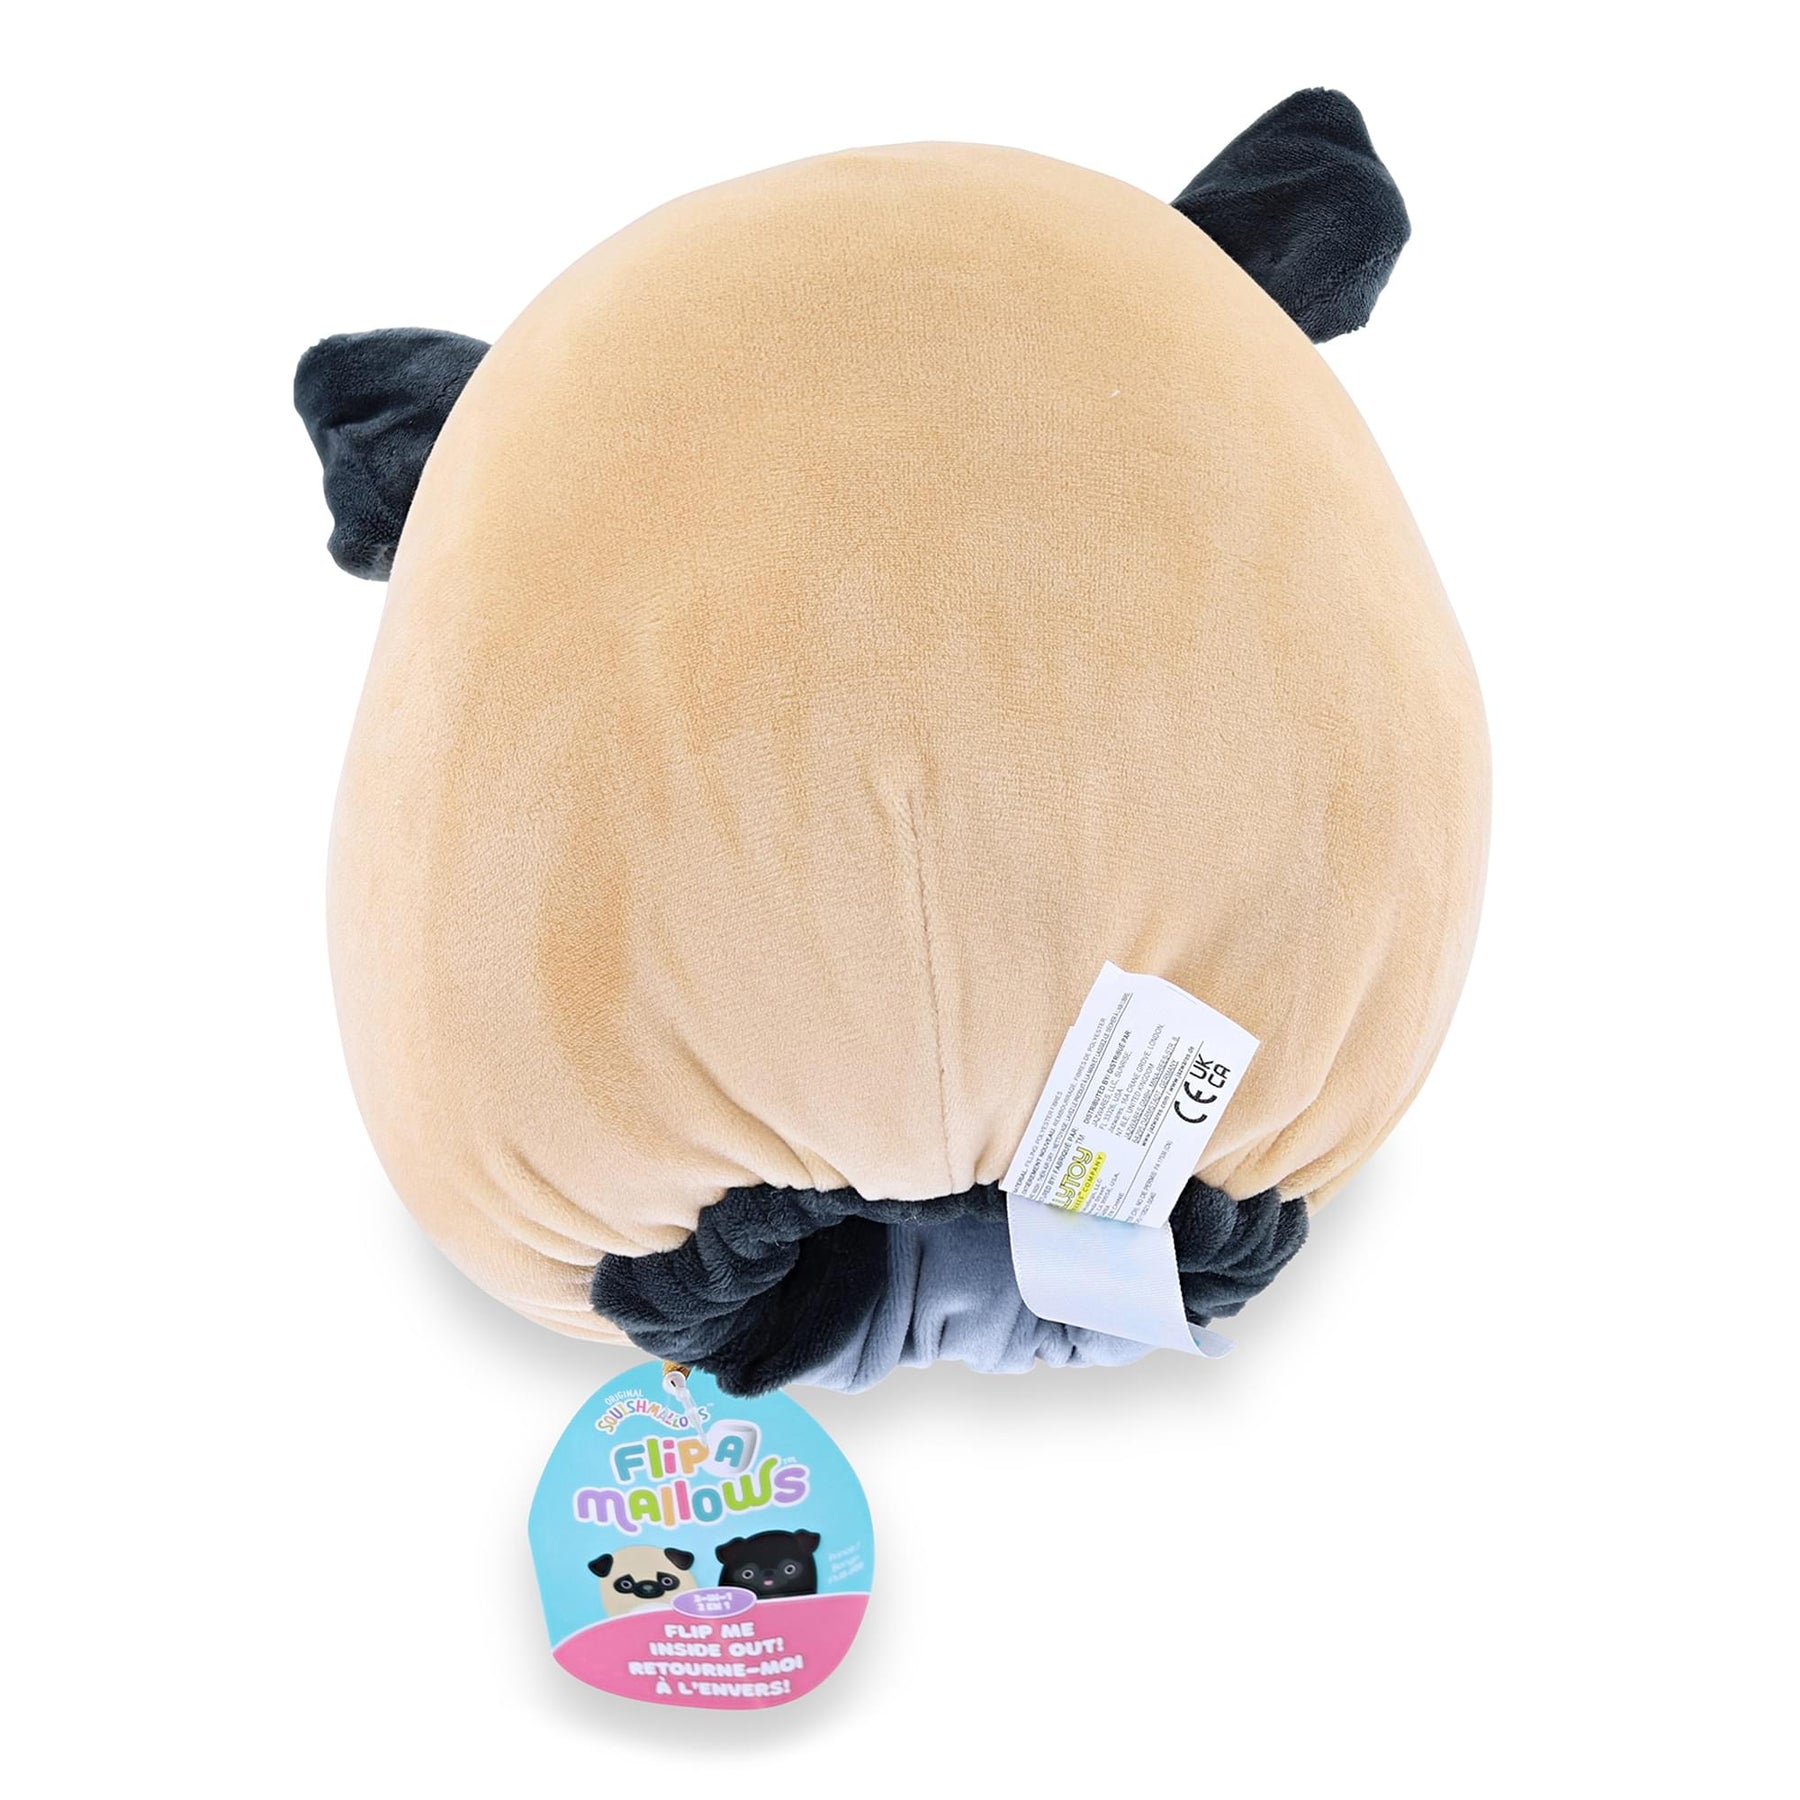 Squishmallows Official Kellytoys Plush 8 Inch Prince the Pug